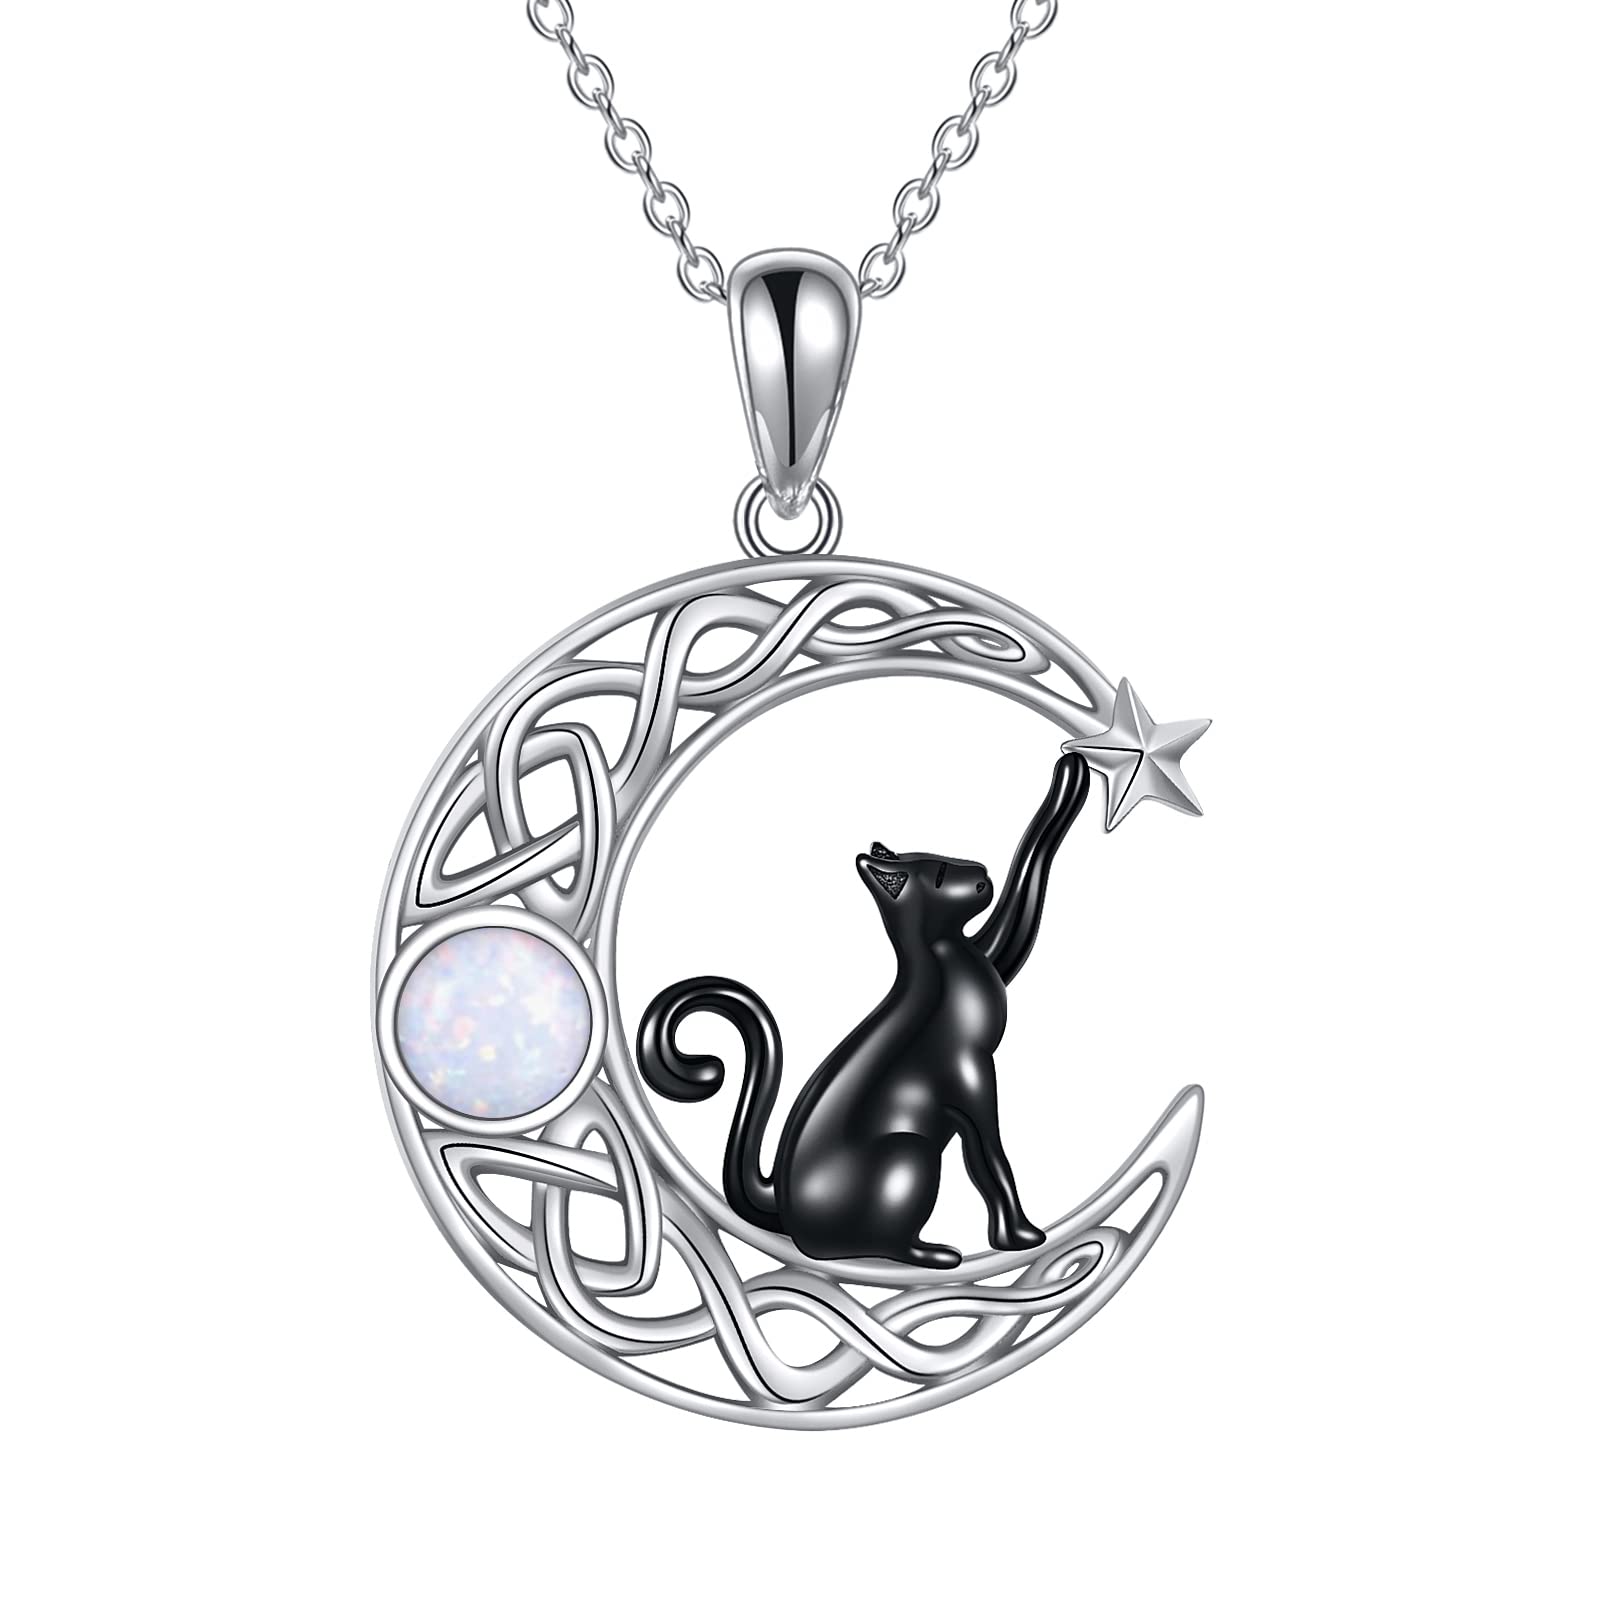 VONALA 925 Sterling Silver Black Cat Necklace with Moon Pendant Jewellery Birthday Gifts for Women Teen Girls